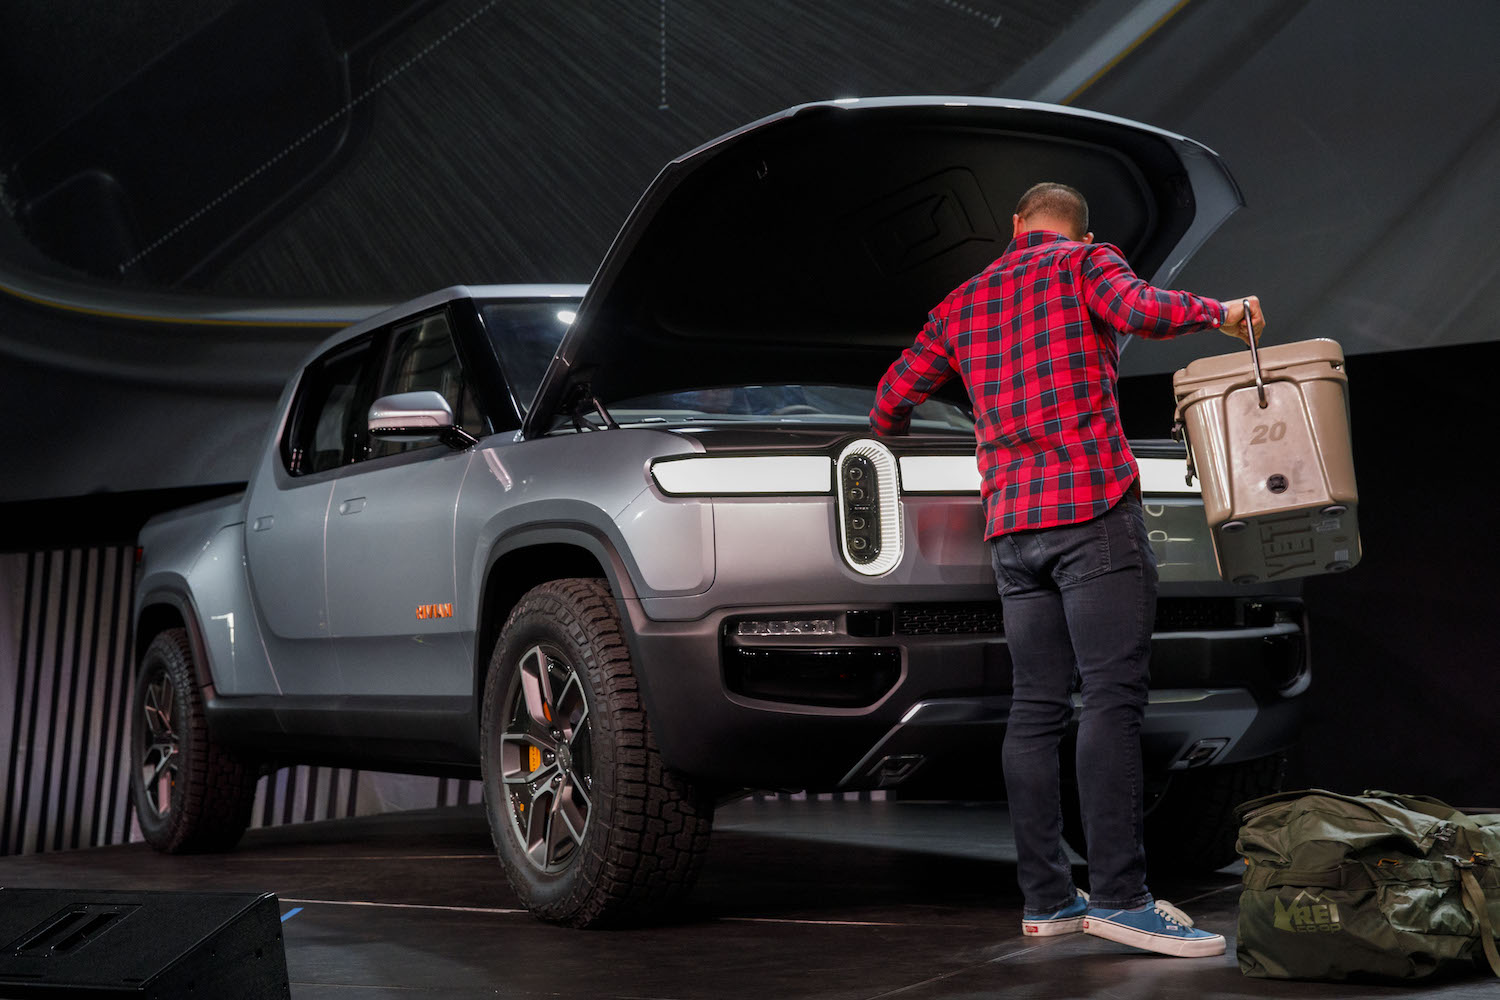 A man setting a cooler in the front trunk of a silver Rivian electric truck parked on a stage.